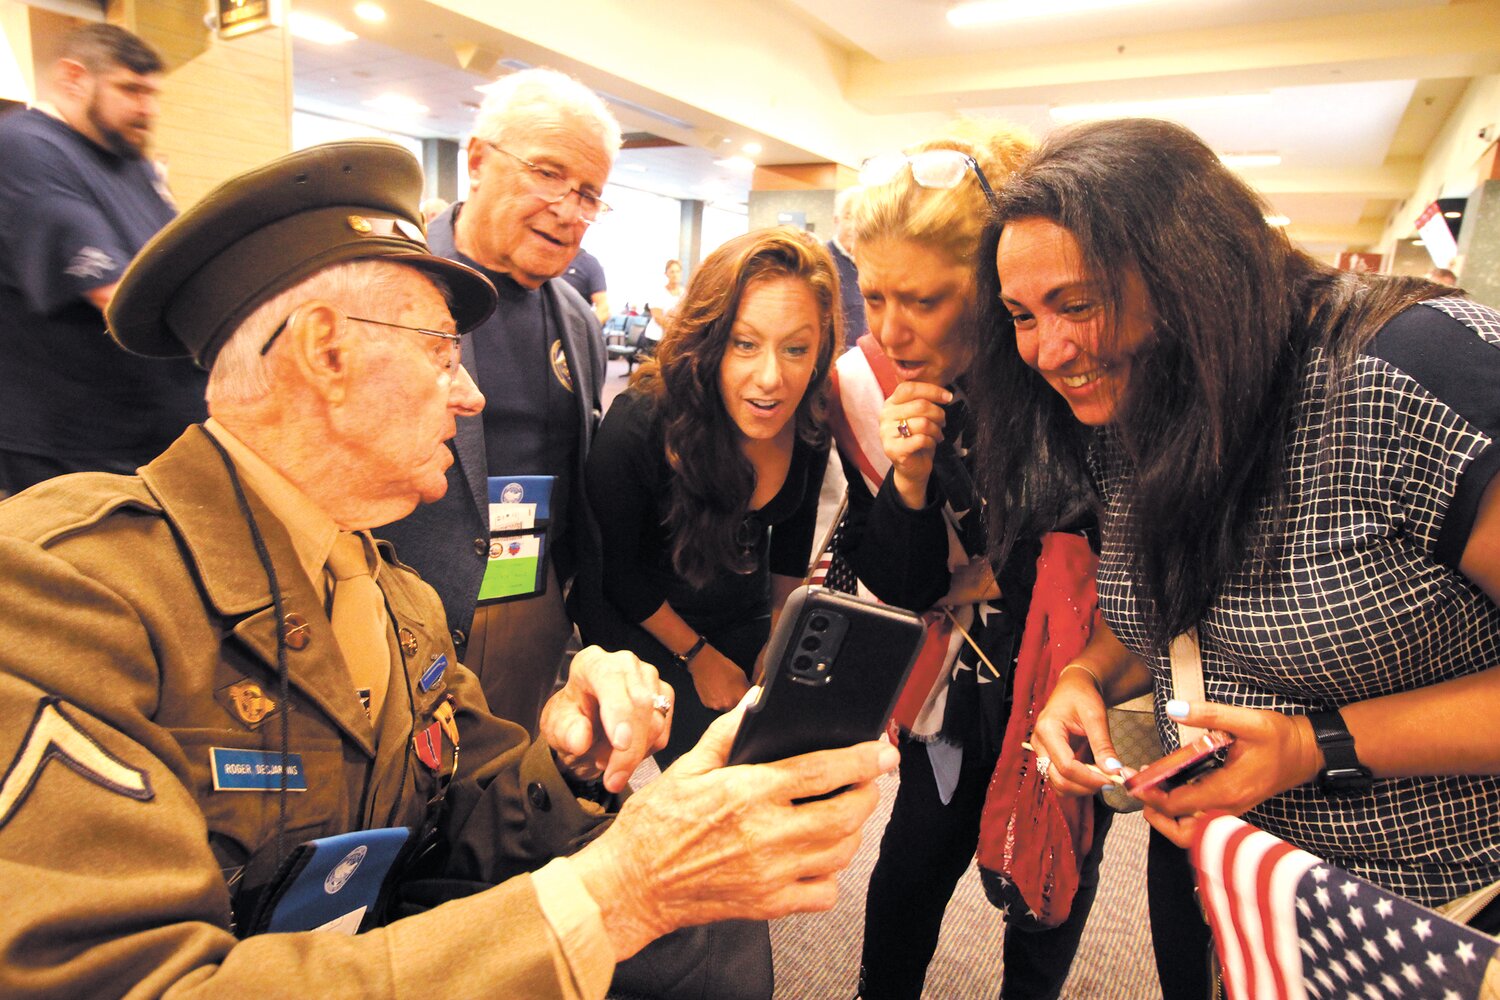 98 AND HIGH TECH: WWII Army veteran Roger Desjardins of North Providence, the oldest member of Honor Flight Freedom that left from Green Airport Monday, pulled out his cell phone to accompany stories he was recounting. Behind him is North Providence Mayor Charles Lombardi who was Desjardins’ guardian for the flight. (Cranston Herald photos by John Howell)